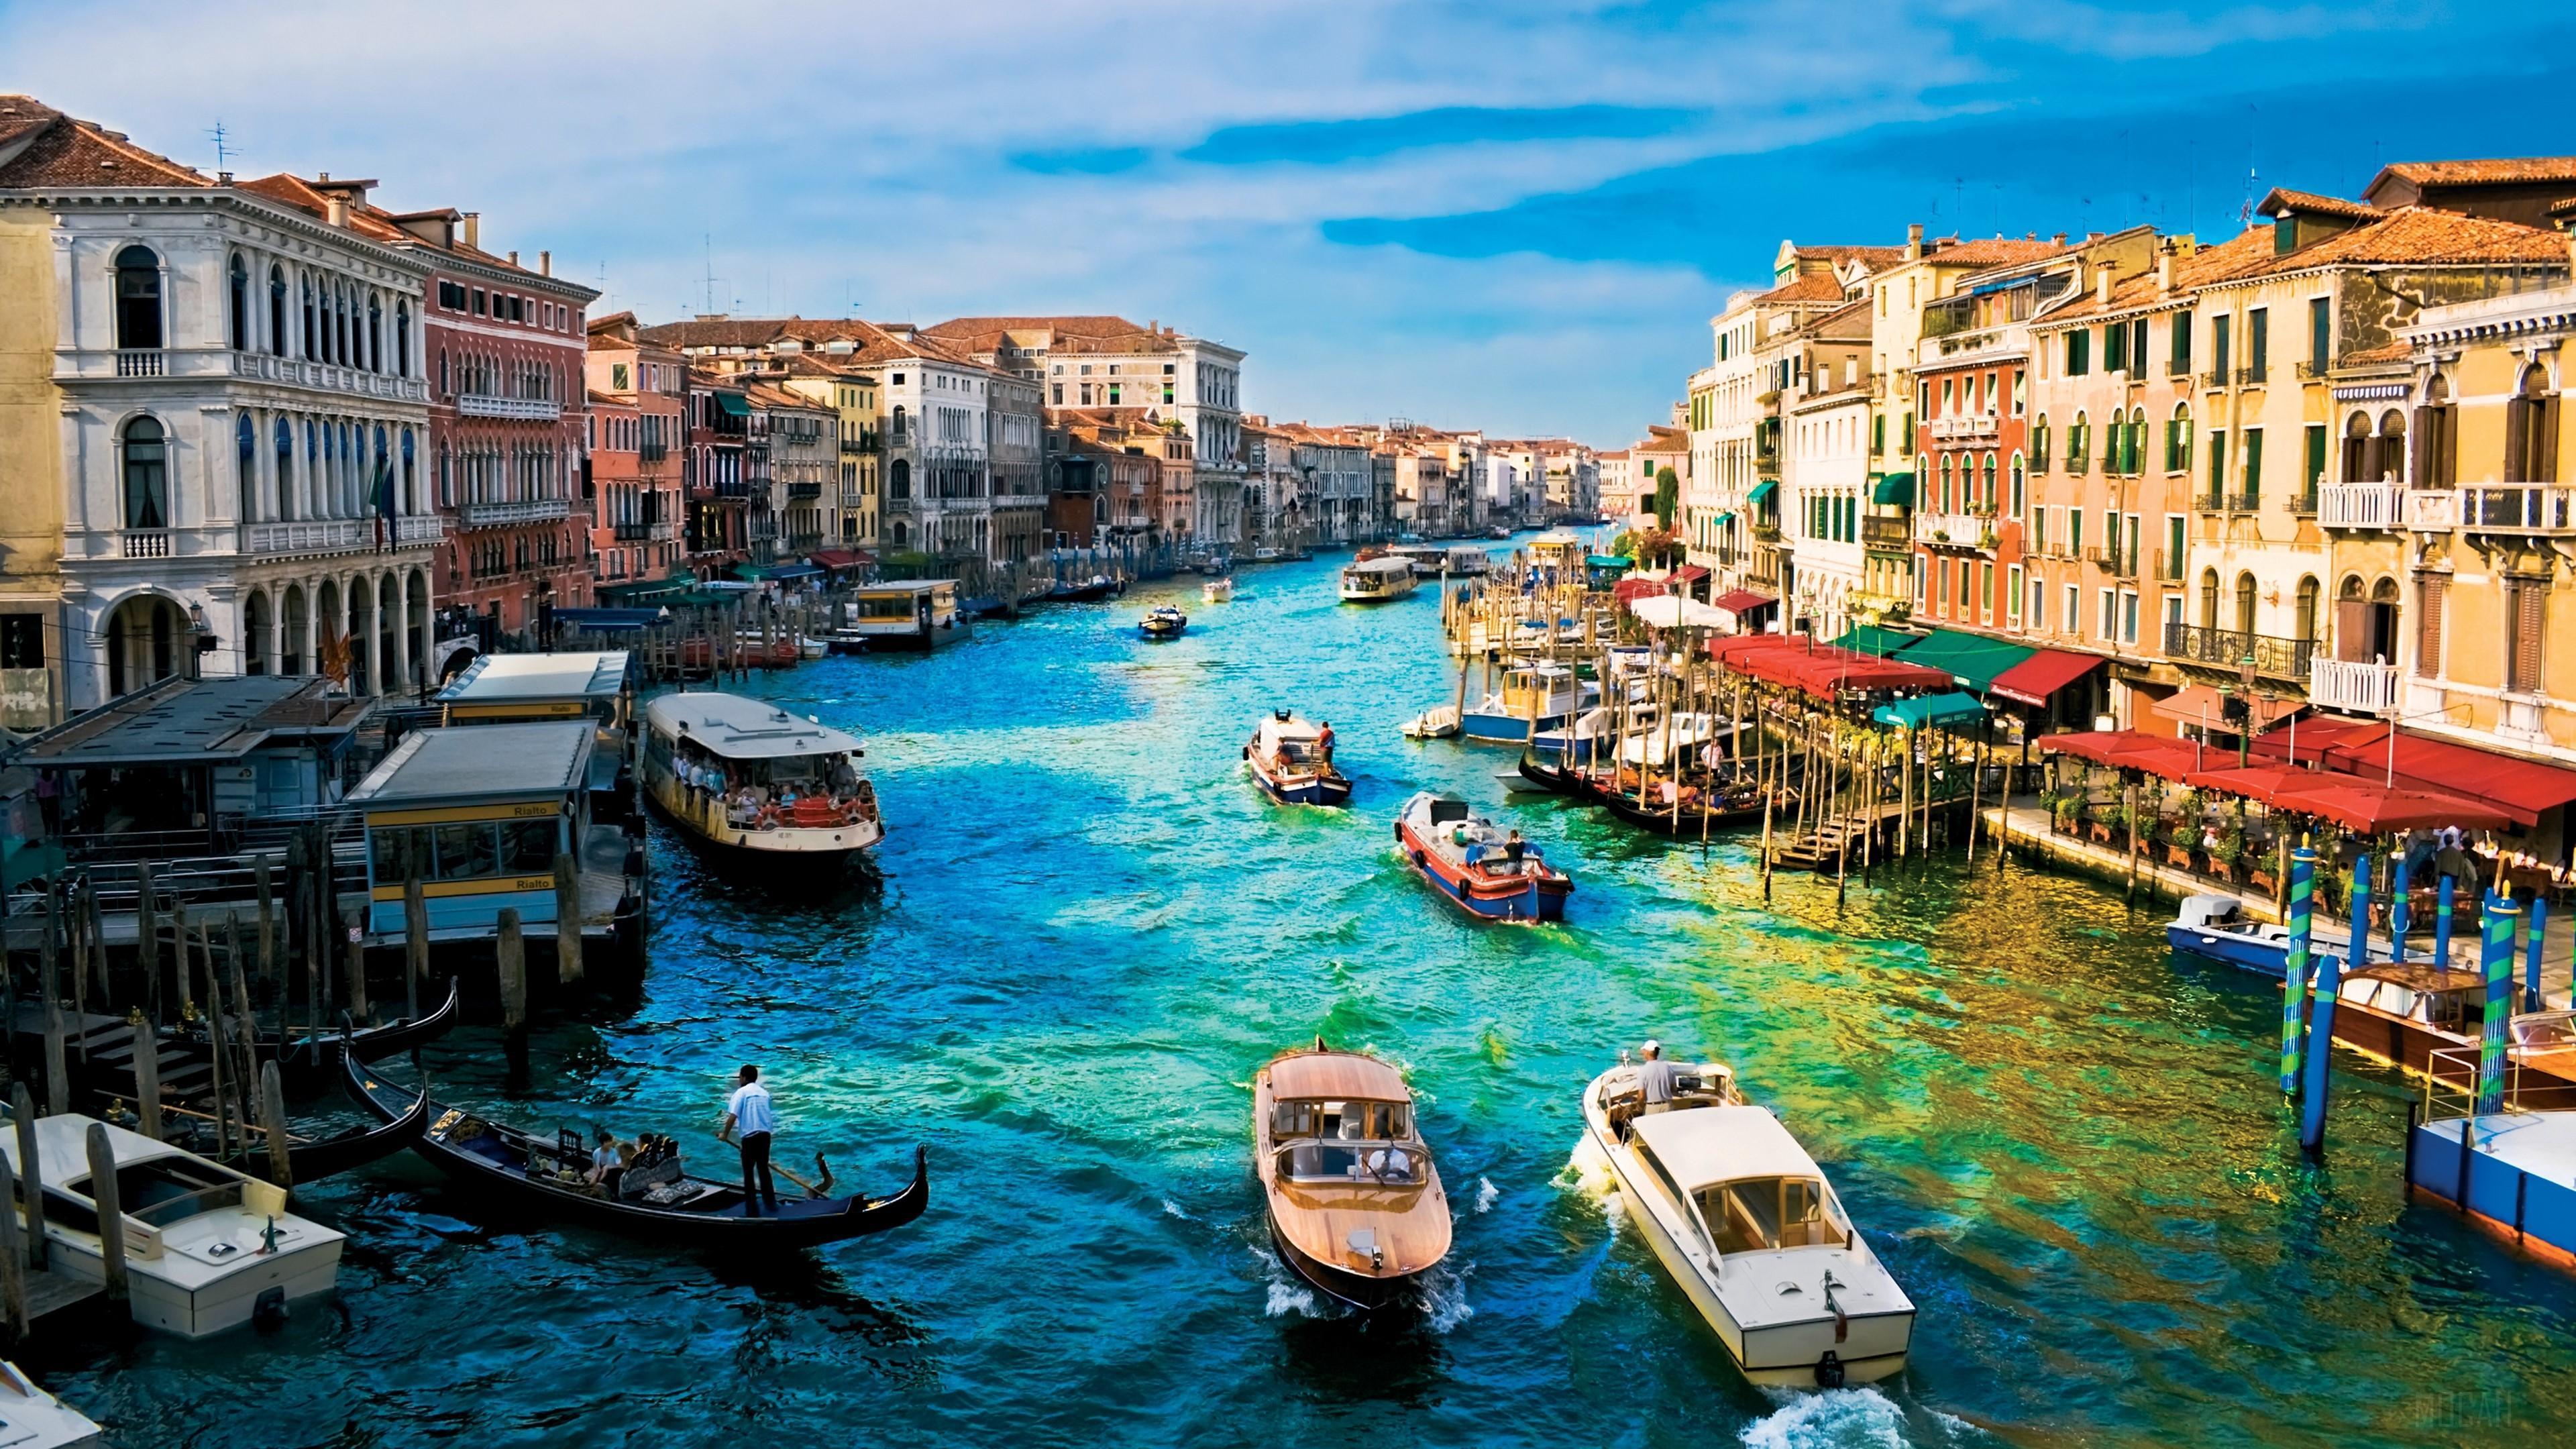 HD wallpaper, Italy, Boat, Grand Canal, City, Venice 4K, Canal